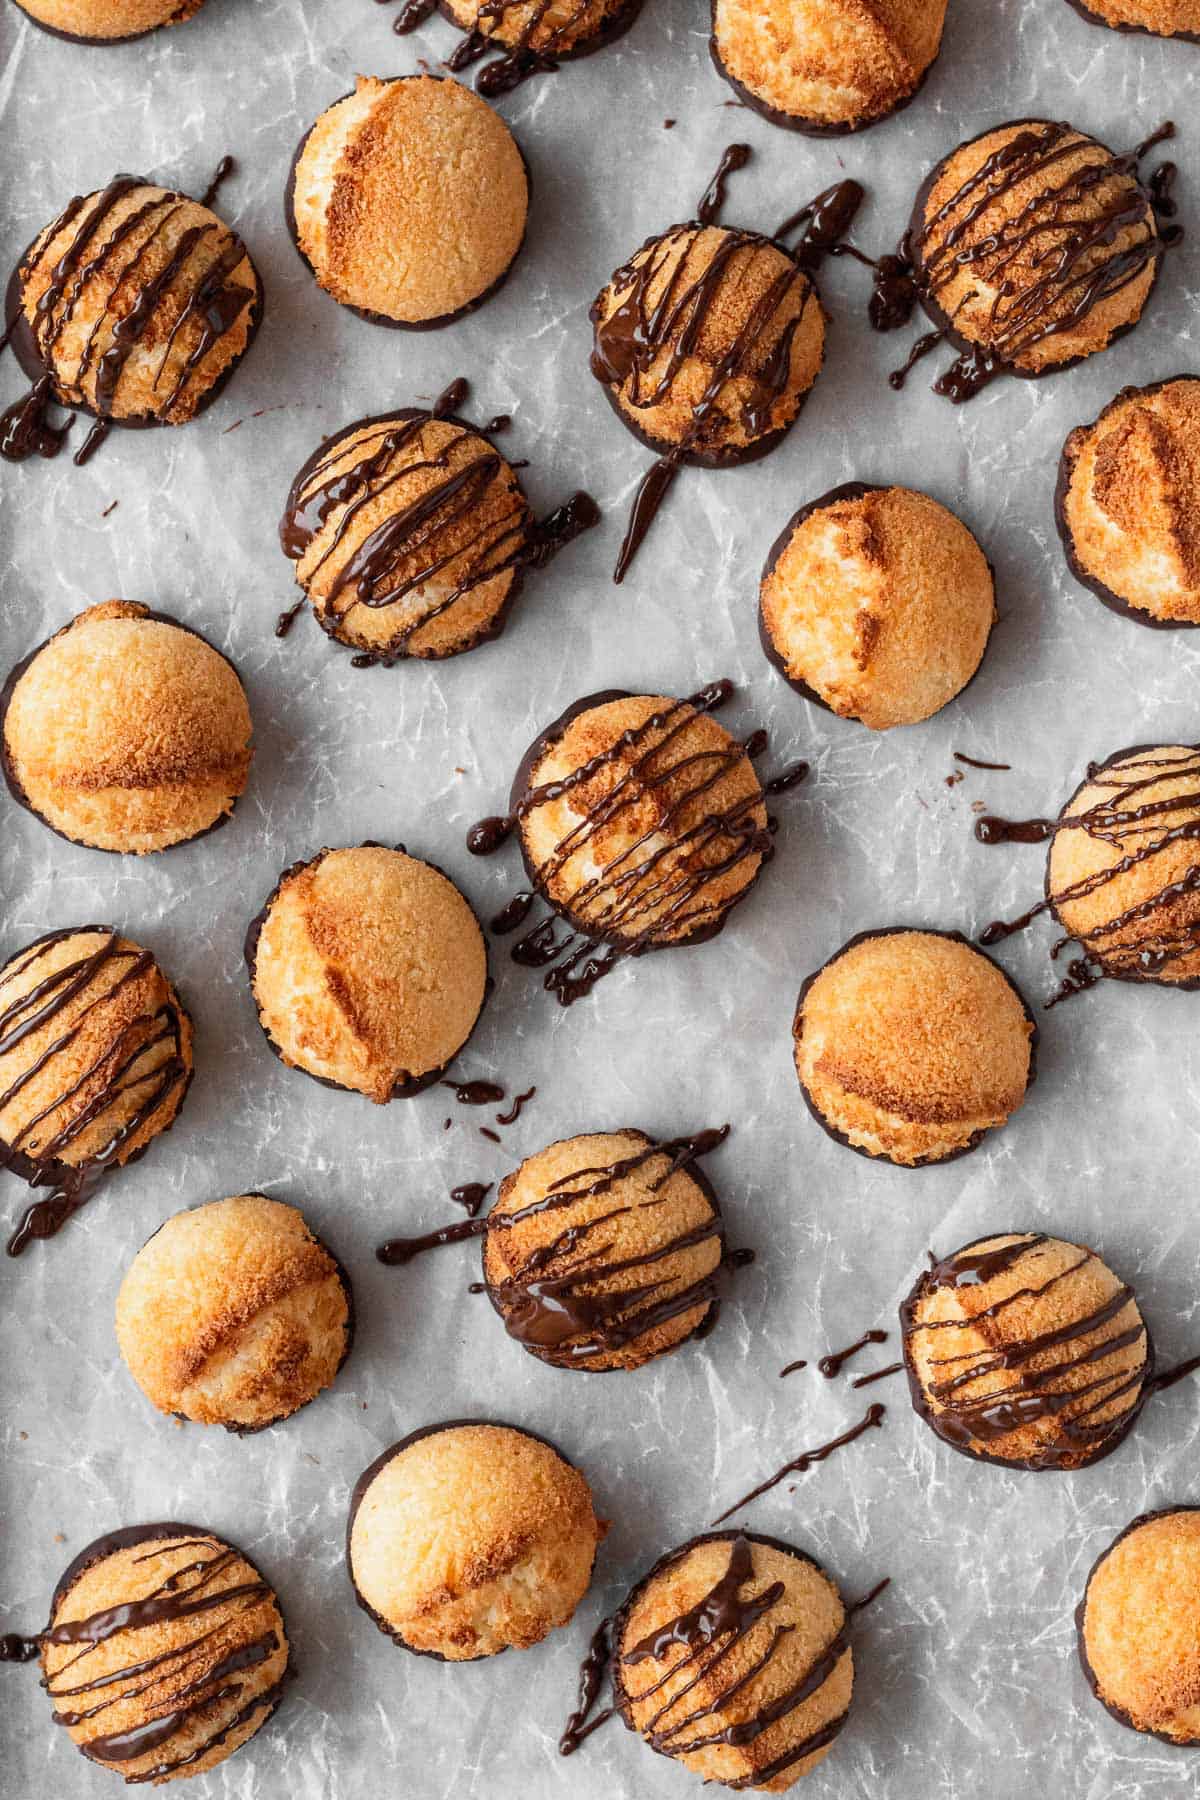 Vegan coconut macaroons with a chocolate drizzle on parchment paper.